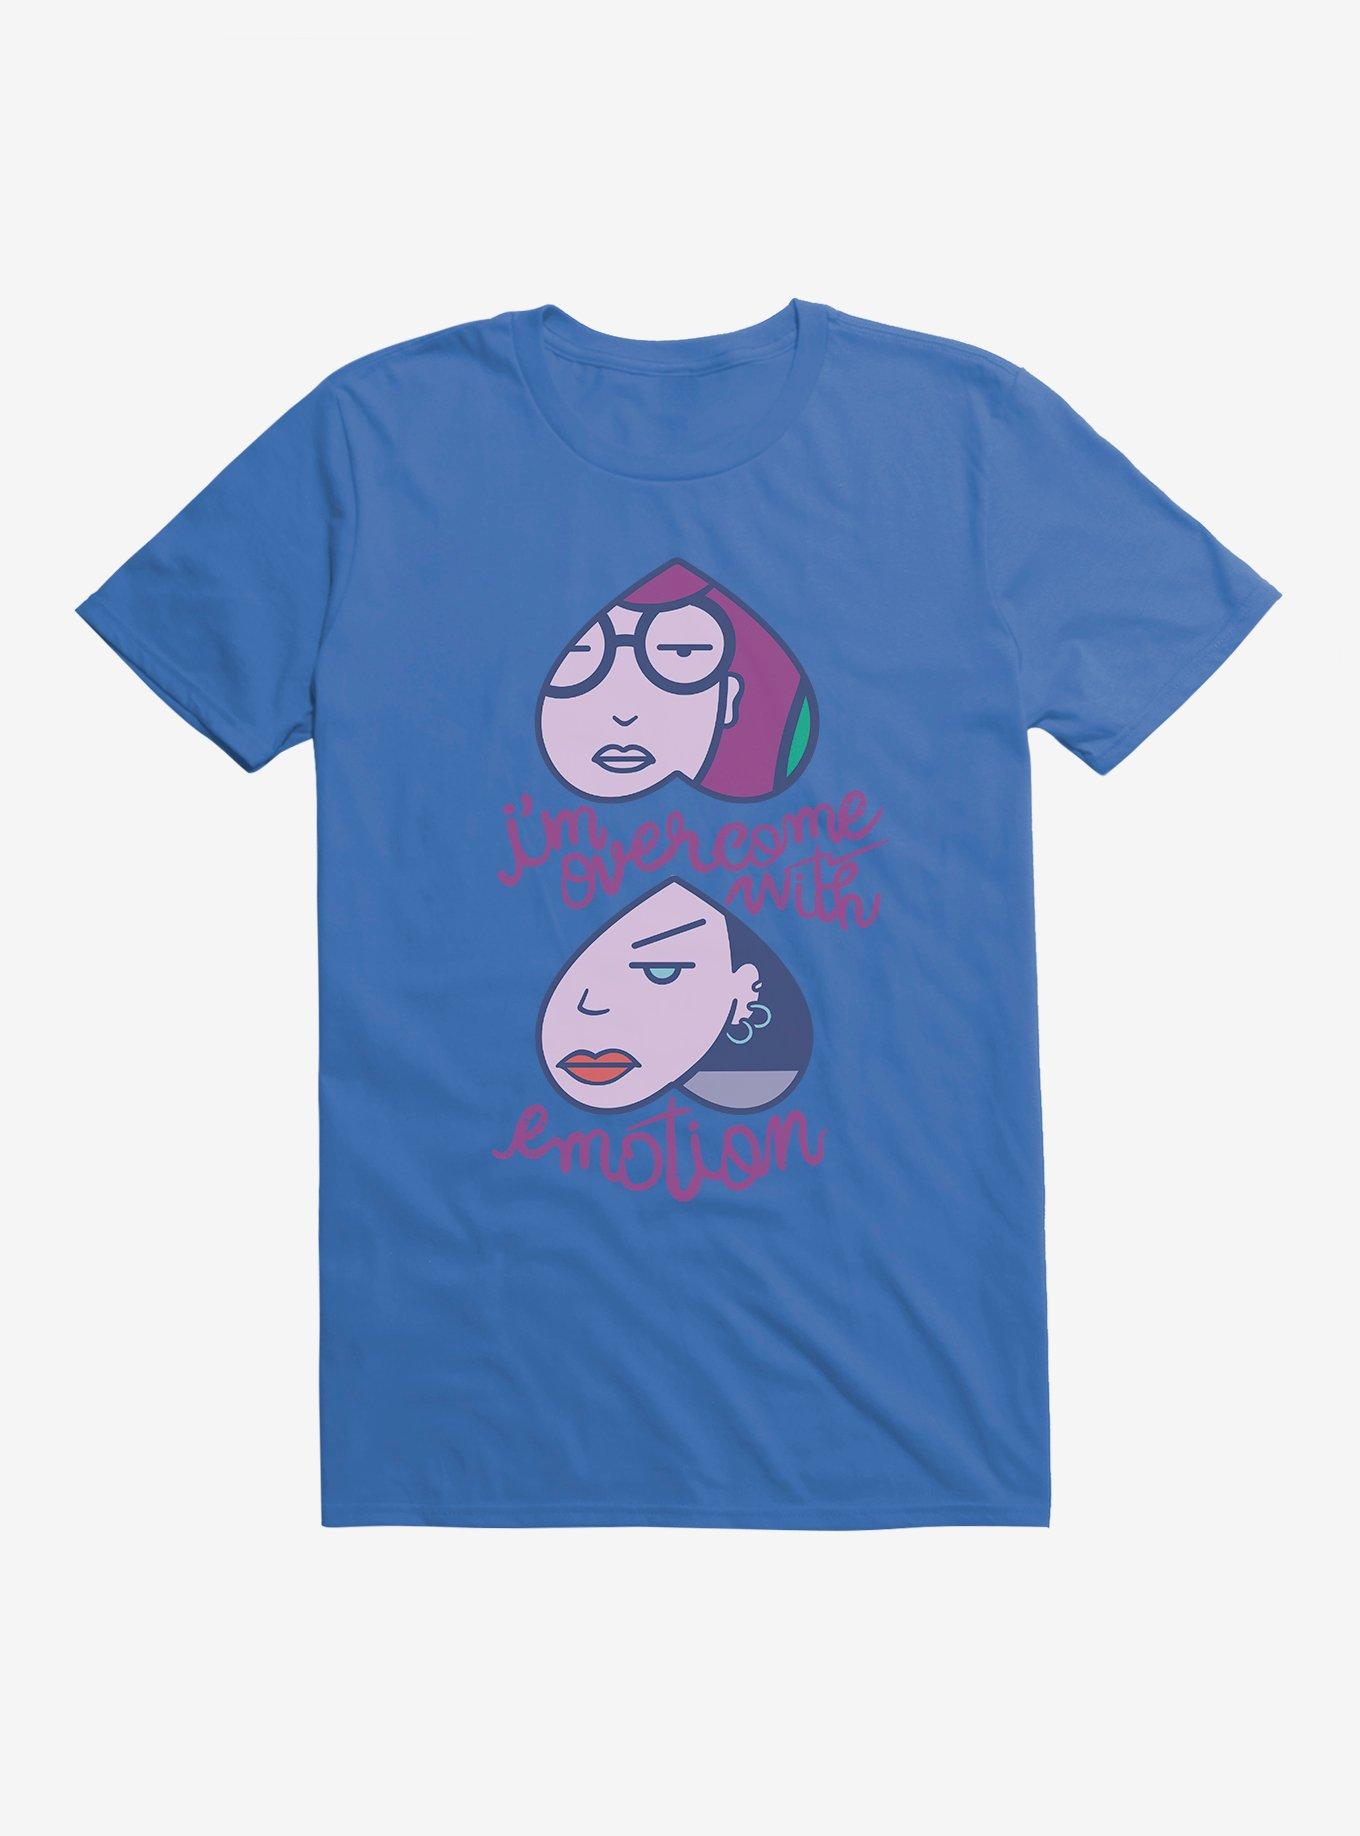 Daria Overcome With Emotion Bff Hearts T Shirt Hot Topic